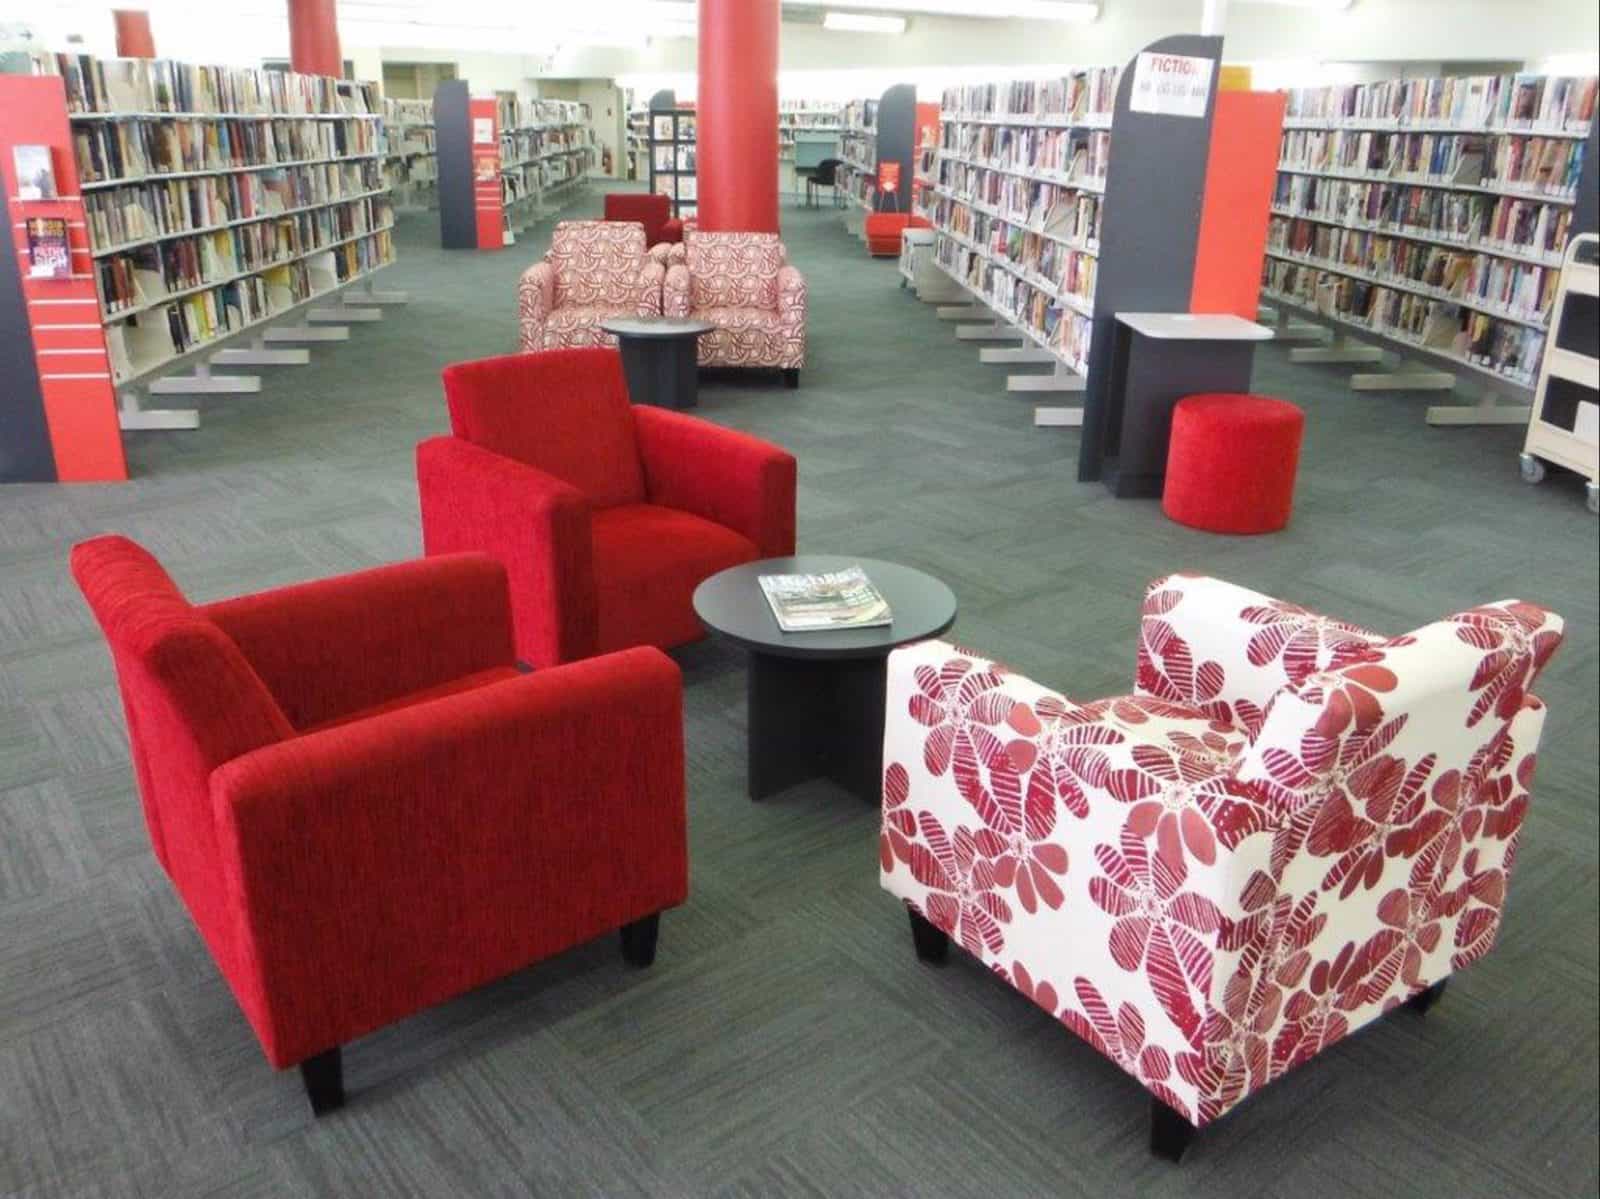 Goulburn Library and Local Studies Room